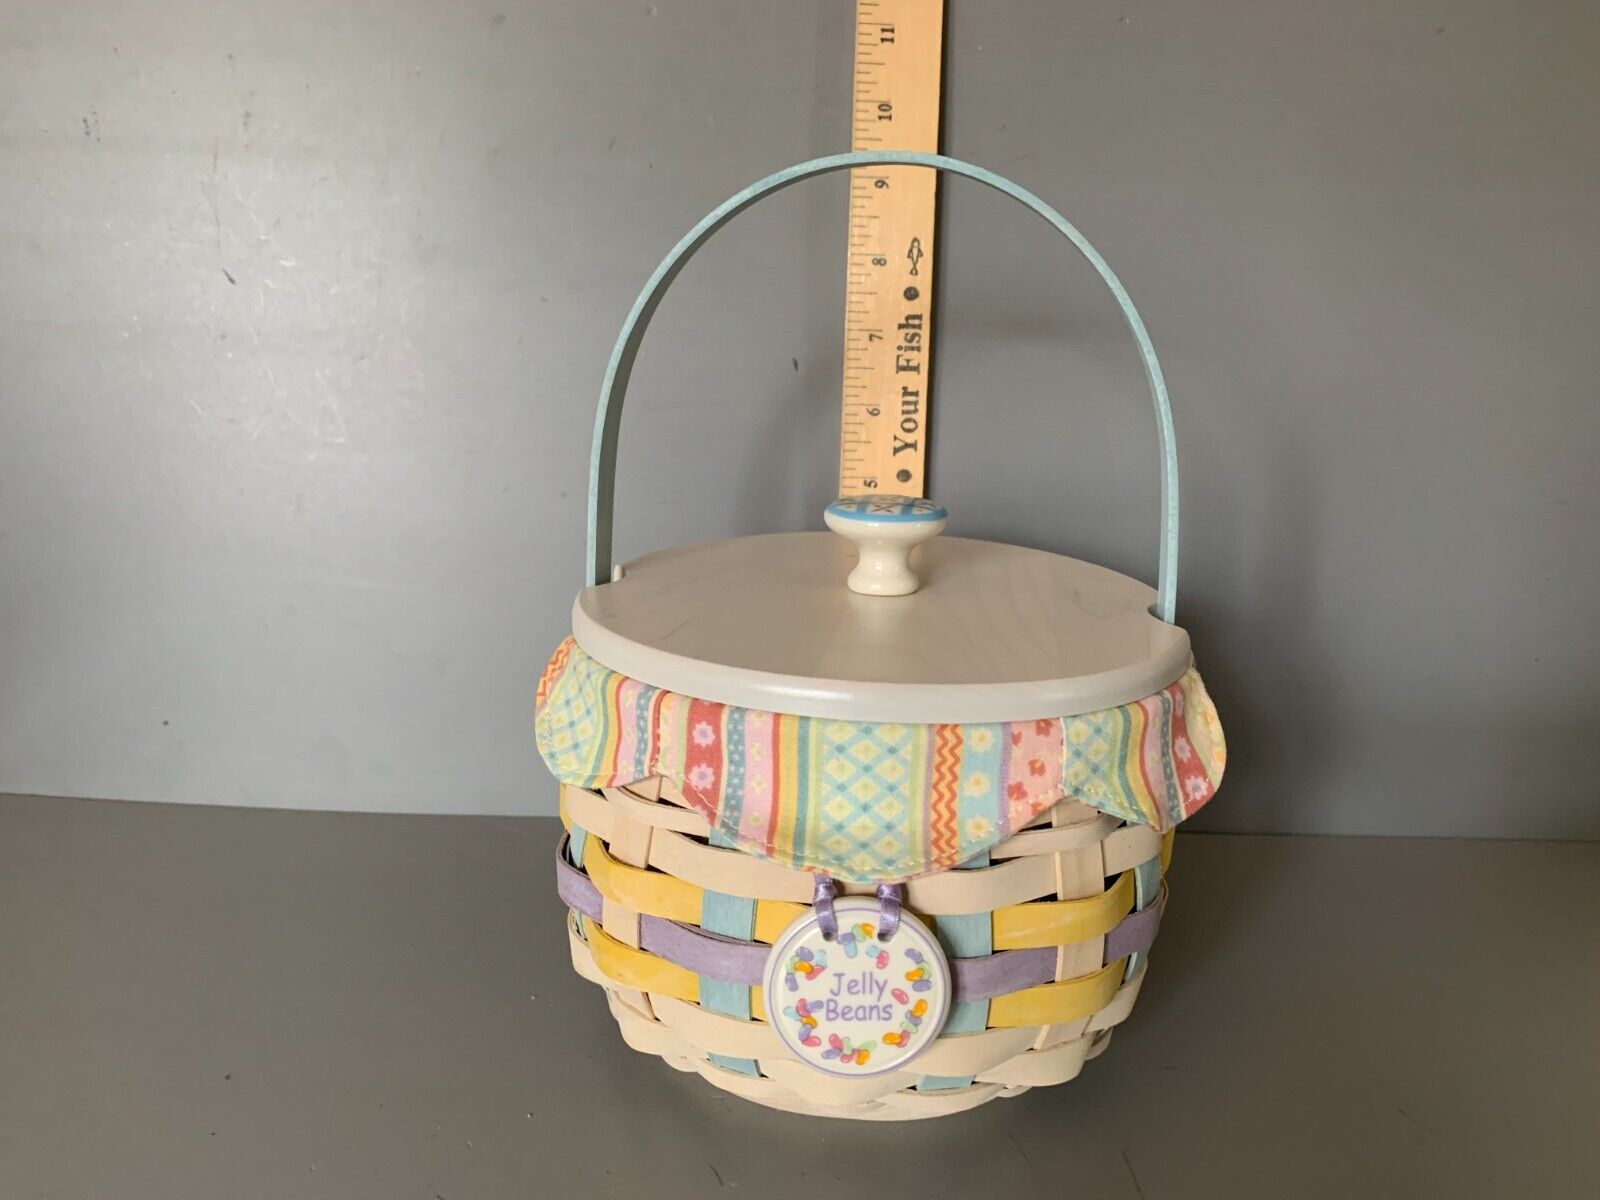 LONGABERGER 2008 EASTER BASKET WITH LID, JELLYBEAN SIGN, FABRIC, PLASTIC INSERT